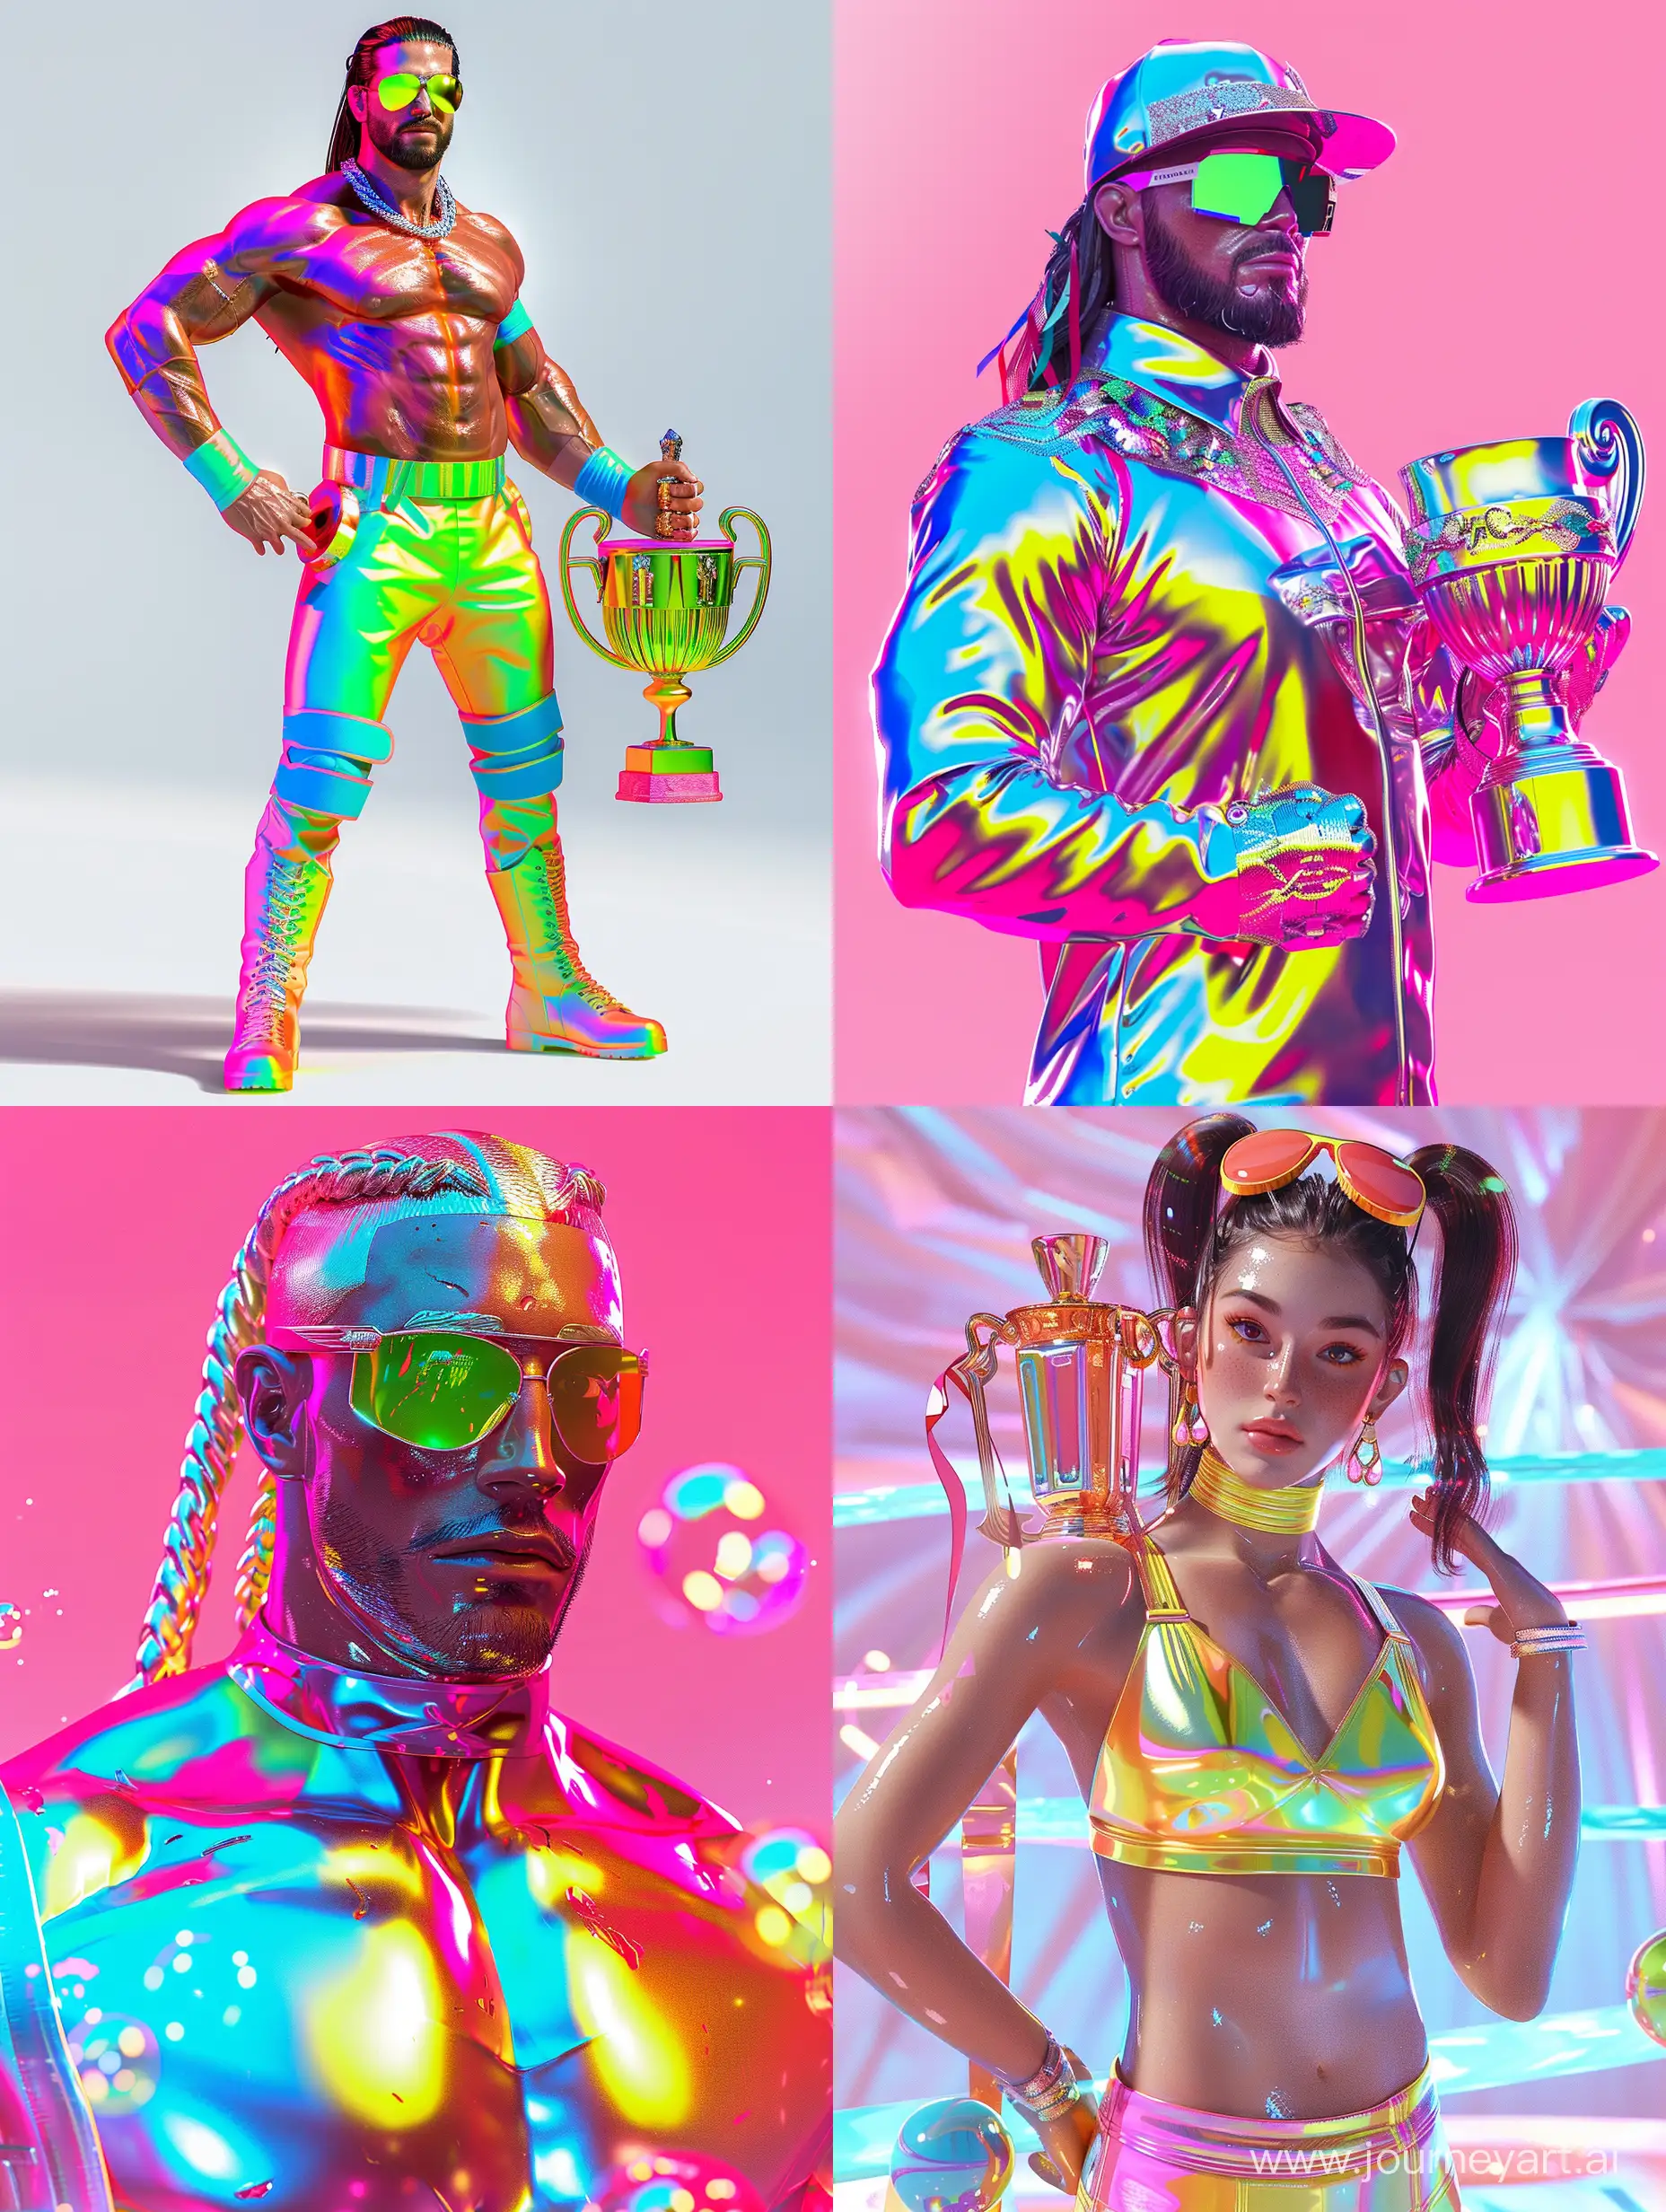 Realistic 3D cartoon style rendering, roman reigns, pro wrestling wwe, trophy, summer fashion clothing, candy-colored clothes, new popular portraits, fashion illustrations, bright colors, neon realism, bubble mart production,WWE champion, glossy and delicate, clean background, 3D rendering, OC rendering ,8k